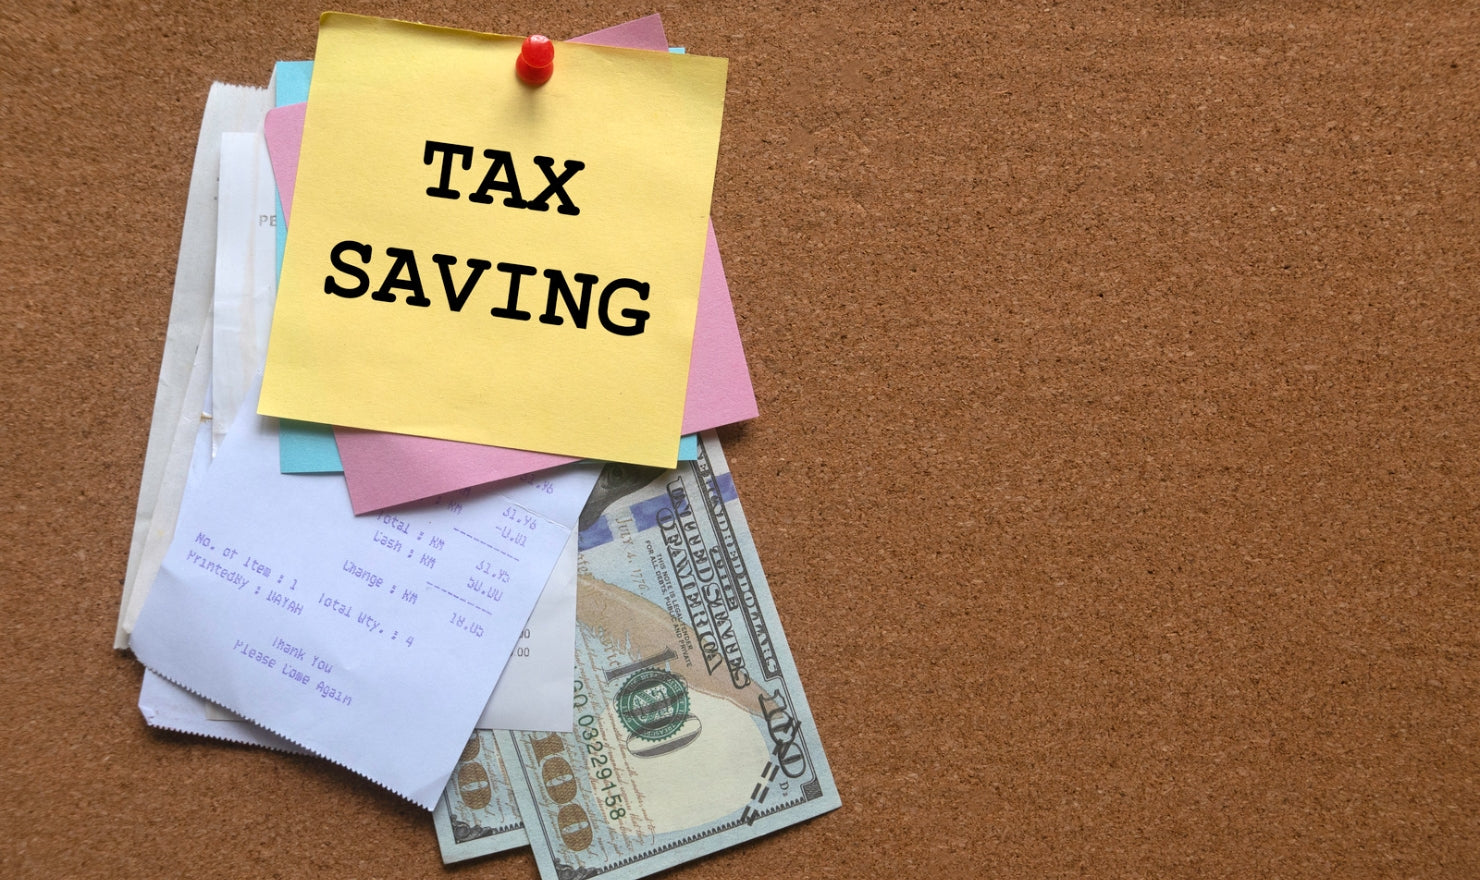 You save on taxes